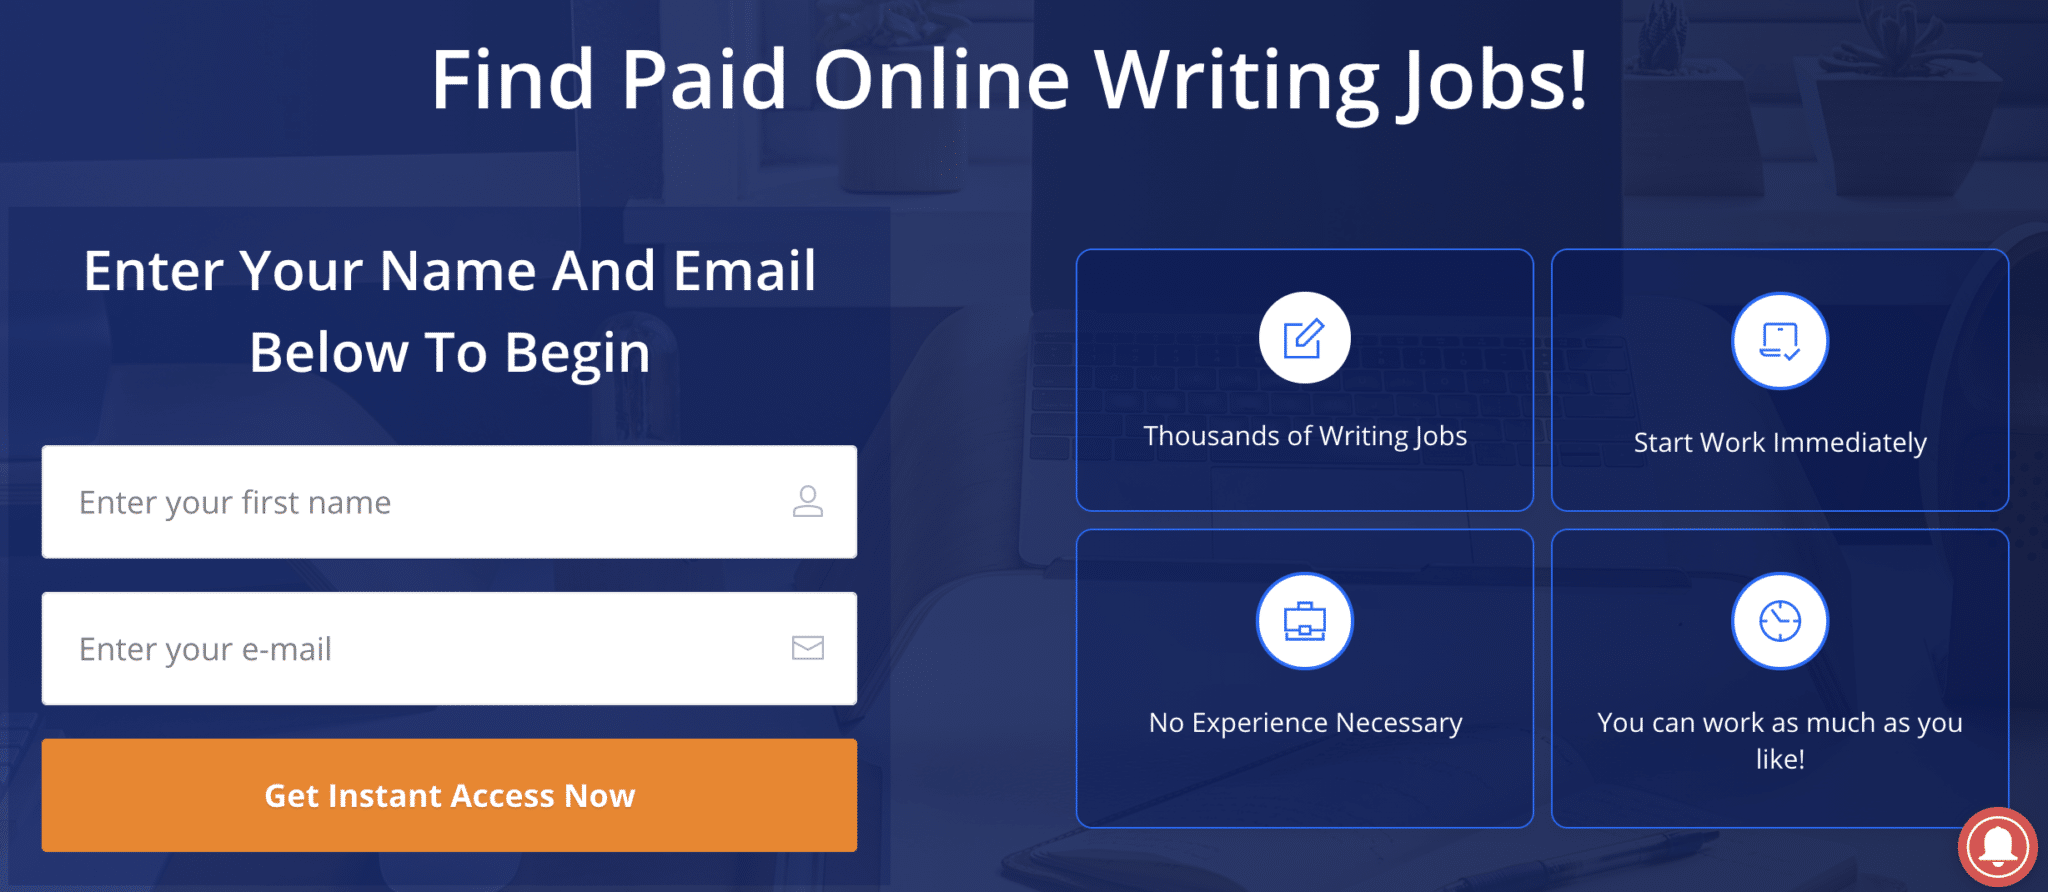 paid online writing jobs review